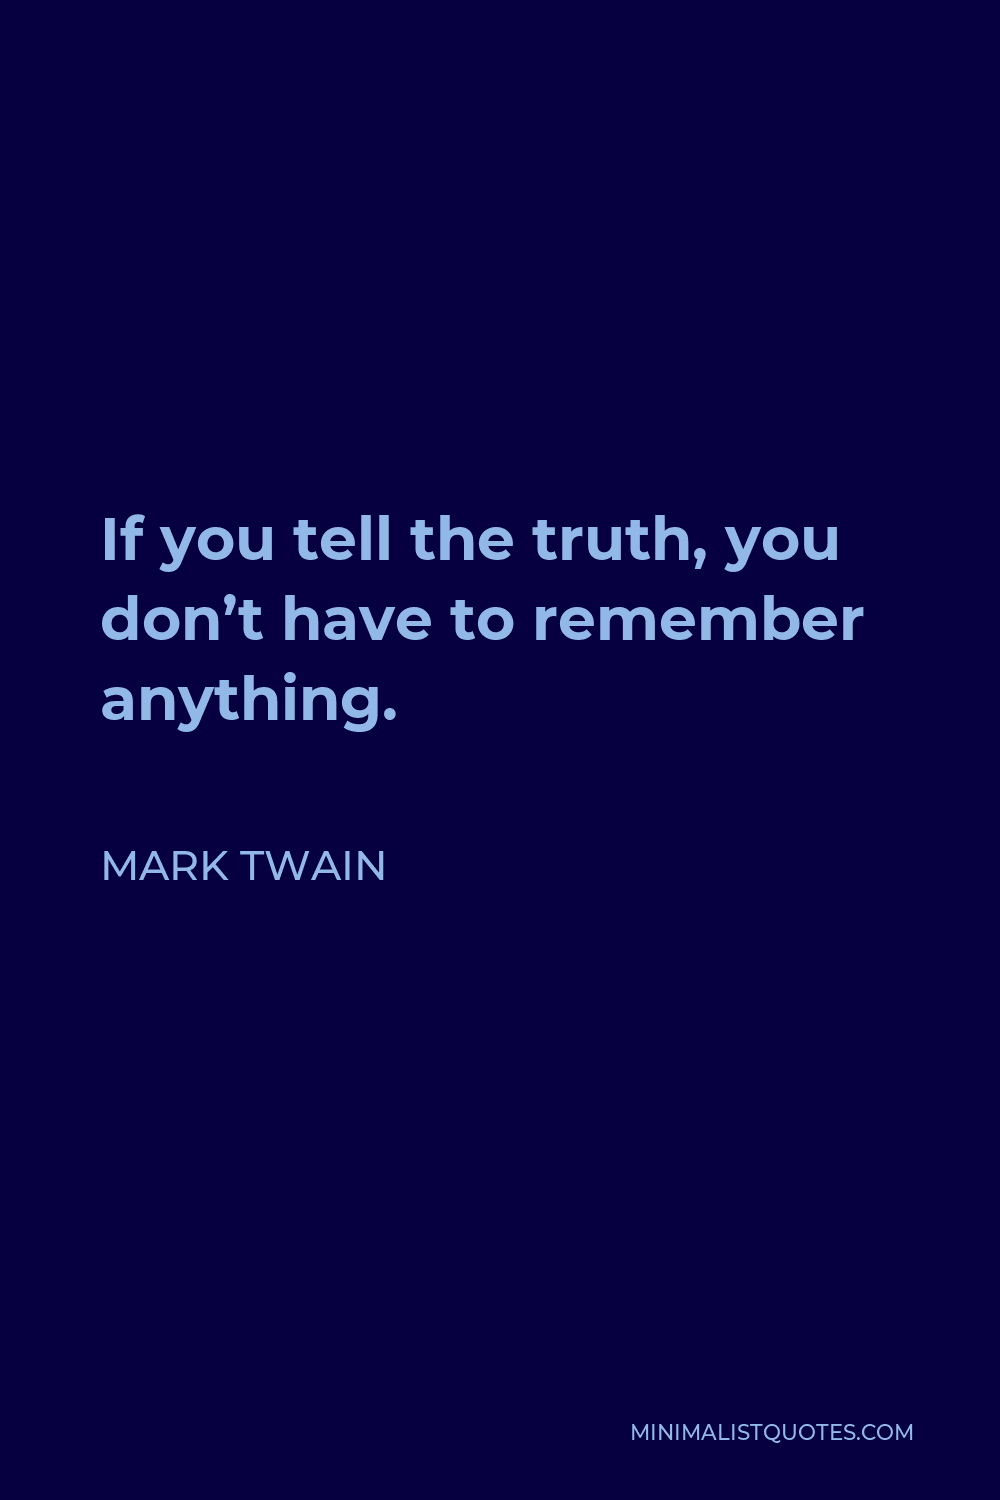 Mark Twain Quote - If you tell the truth, you don’t have to remember anything.